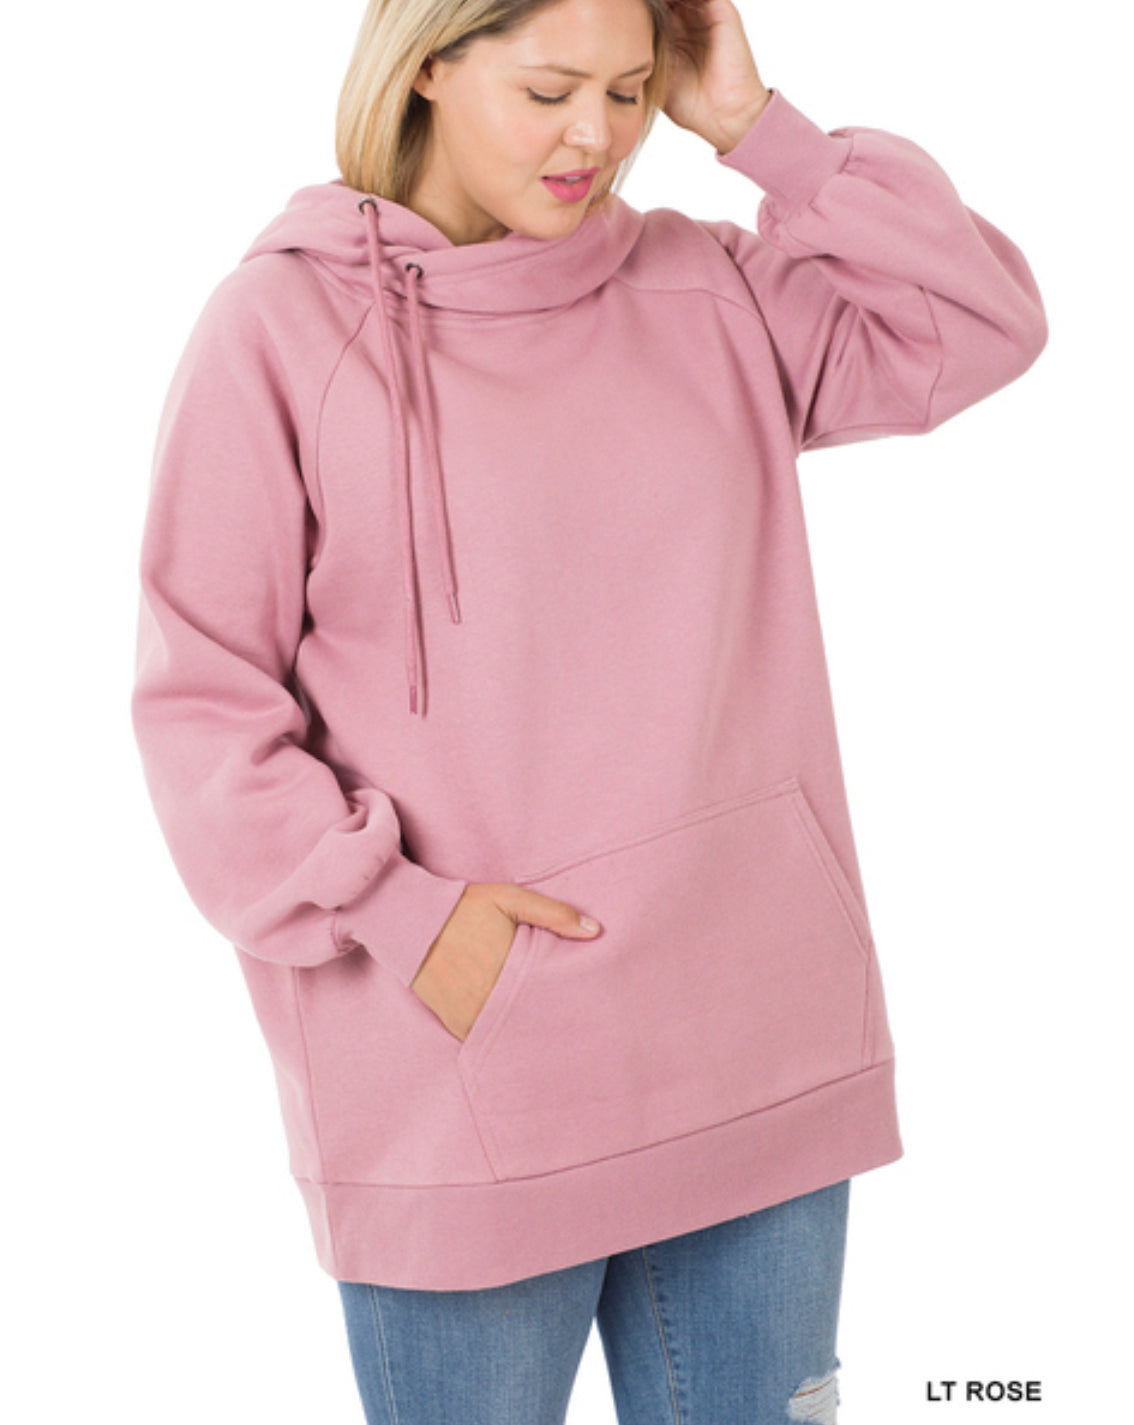 DOORBUSTER! Sports Mom On The Go Hoodie - 4 COLORS